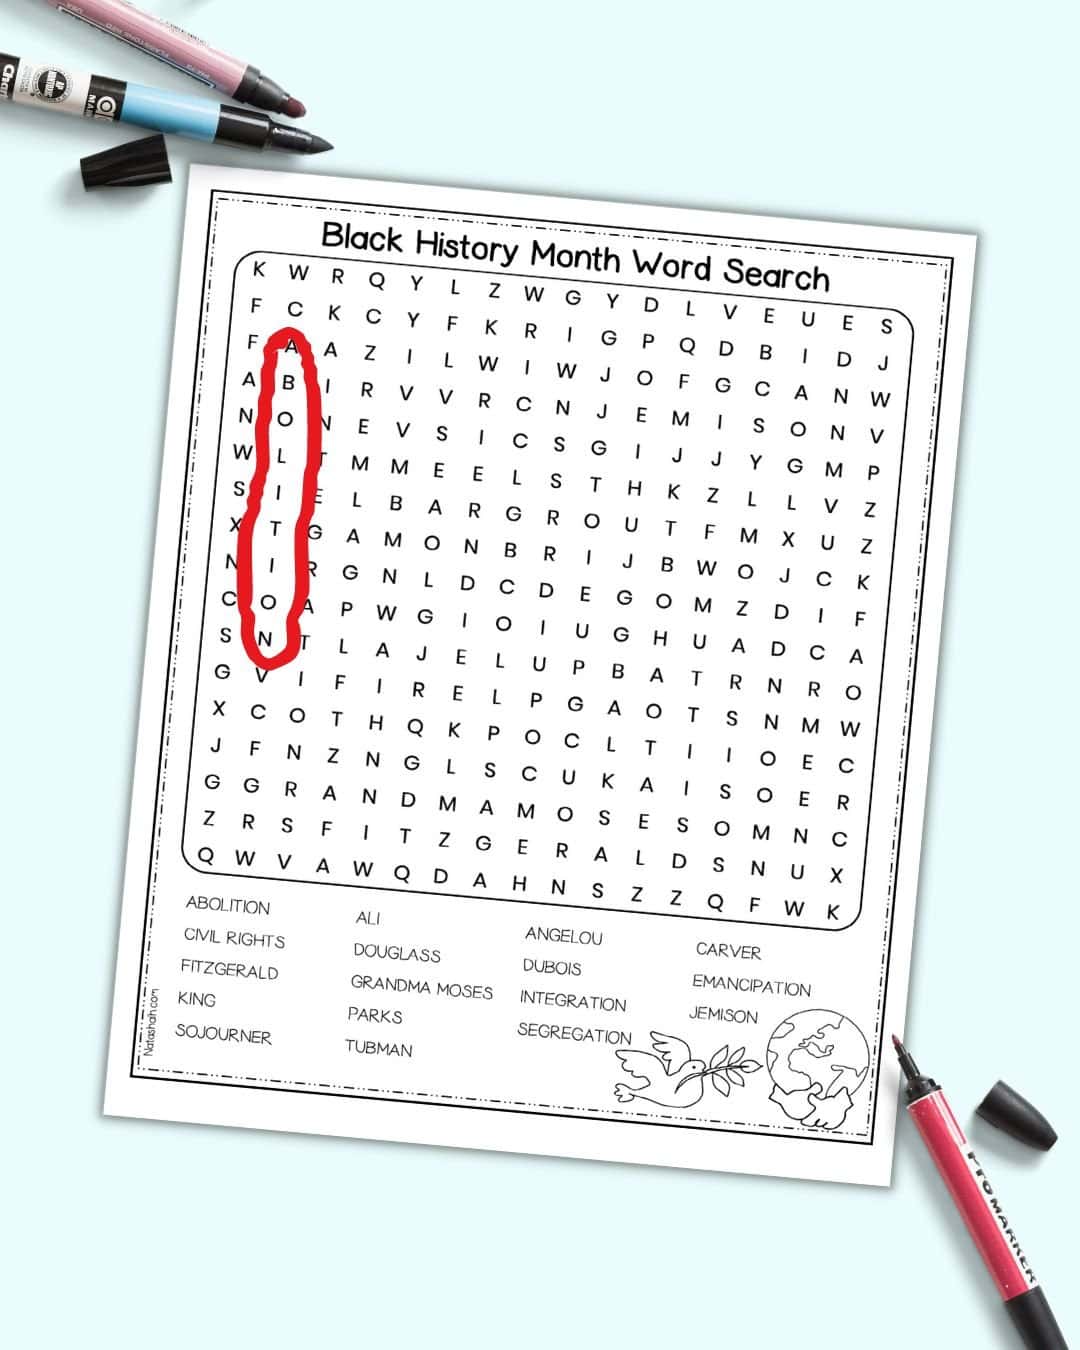 A partially completed black history month word search 